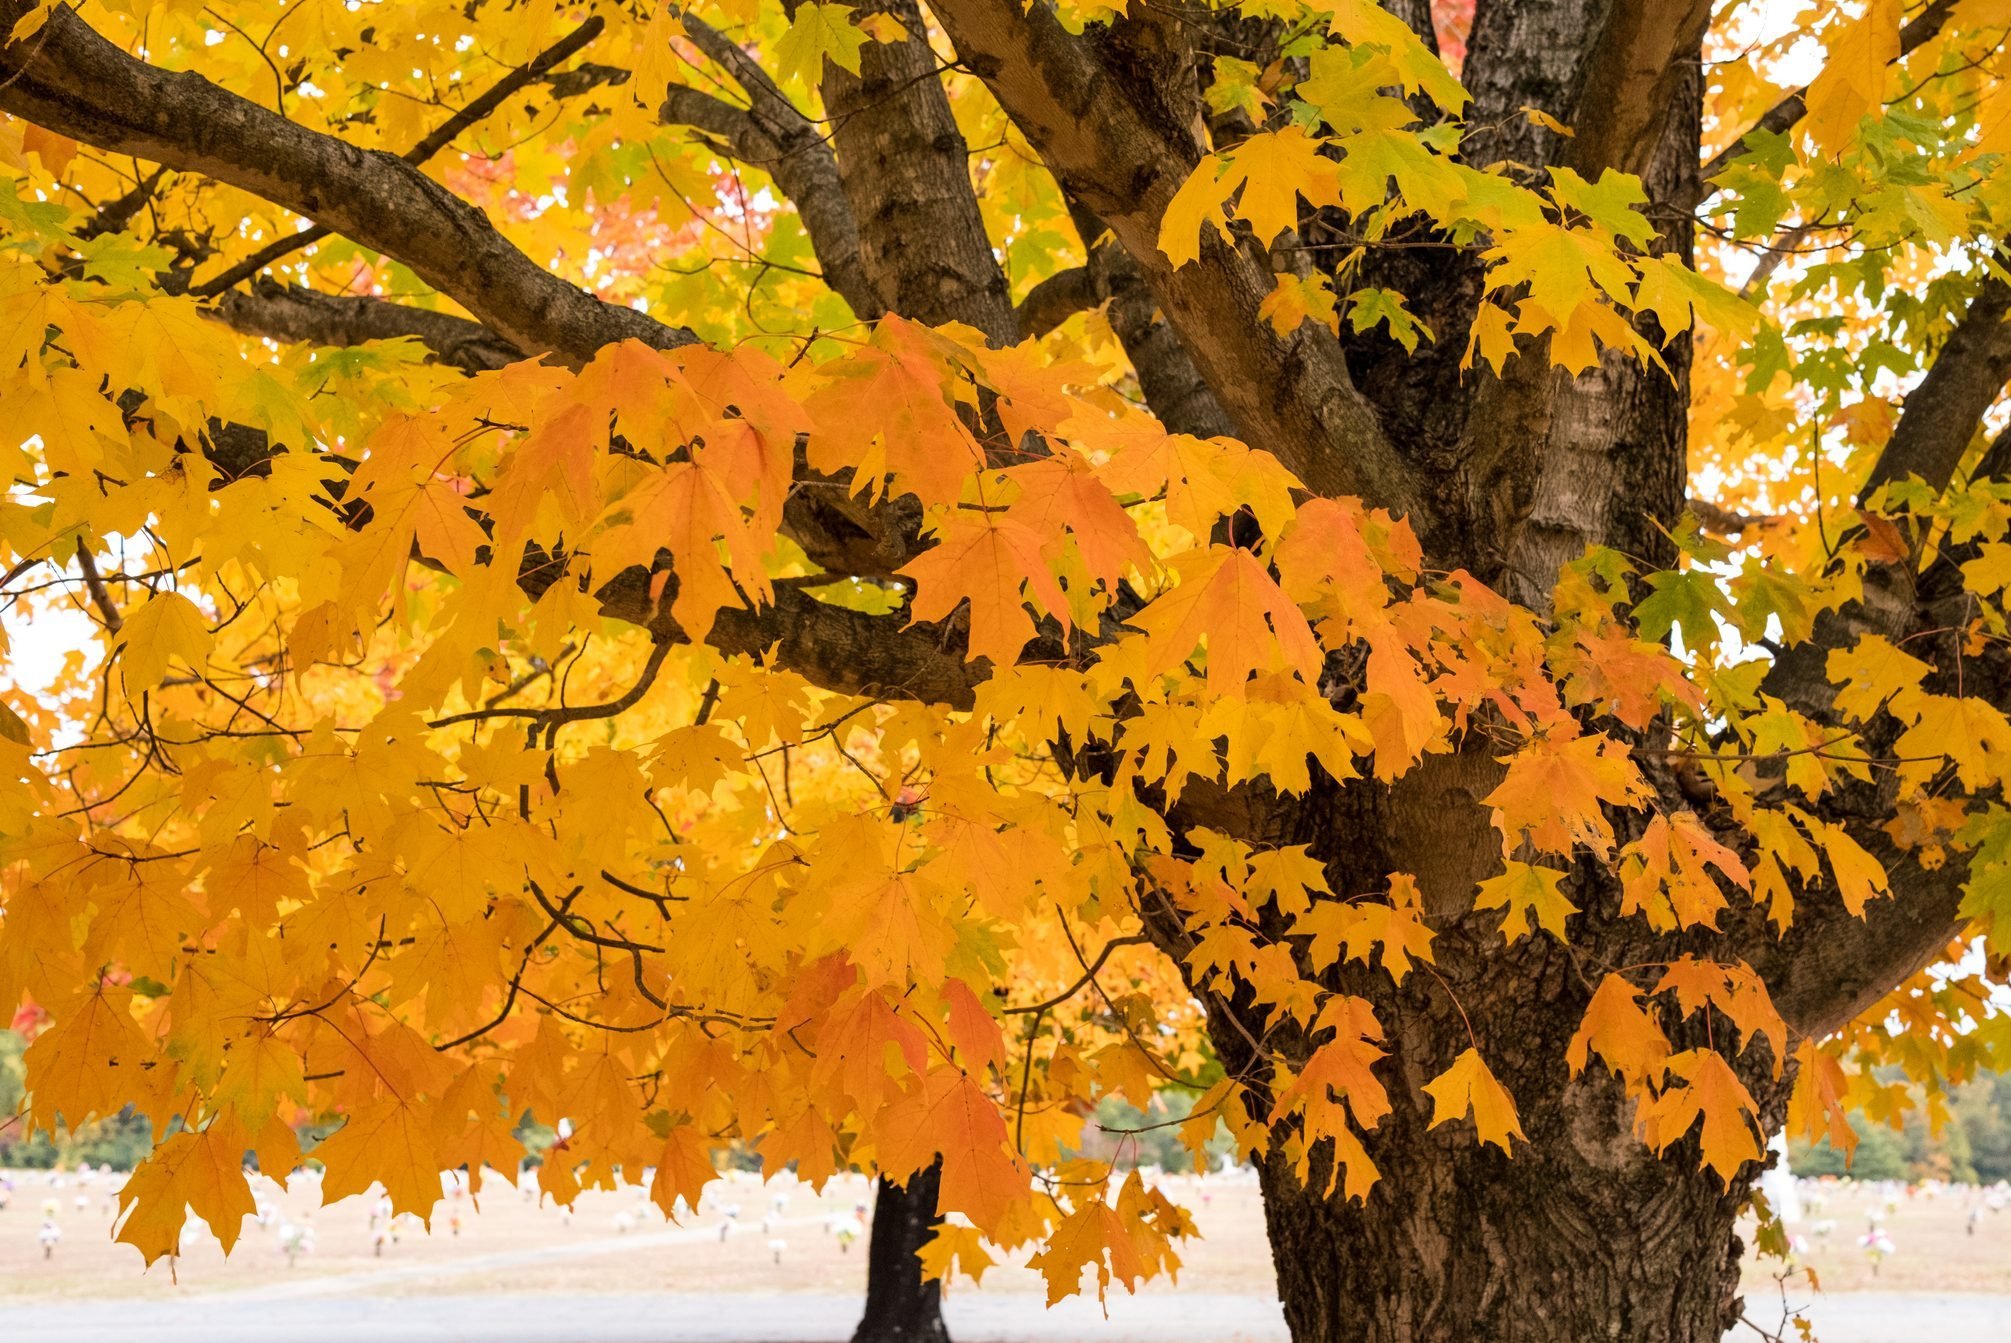 <p>While the large <a href="https://www.familyhandyman.com/article/common-types-of-maple-trees/" rel="noopener noreferrer">maples</a> in the Eastern U.S. are most celebrated for their fall <a href="https://www.familyhandyman.com/list/trees-great-fall-foliage/" rel="noopener noreferrer">foliage</a>, a range of smaller maples are native to the West.</p> <p>Wherever you live, they're sure to lure caterpillars and other insects that, in turn, attract insect-loving birds like kinglets and warblers, says Pantin. Their nectar-rich flowers are great for <a href="https://www.familyhandyman.com/list/plants-that-support-pollinators-full-life-cycle/" rel="noopener noreferrer">pollinators</a>. Owls, woodpeckers, warblers and tanagers nest in their cavities. Maples also attract deer, moose, squirrels and porcupines.</p> <p>In the East, from Missouri to Maine, native sugar maples are known for their fall colors. In the Great Plains, silver maples are a keystone species. And in the West and Northwest, bigleaf and Rocky Mountain maples are good bets.</p> <p>Maples prefer full-to-part sun and dry to moist soil. Ali says mulch around the base, water regularly during establishment and dry spells, prune selectively to remove dead or diseased branches and monitor for pests.</p>